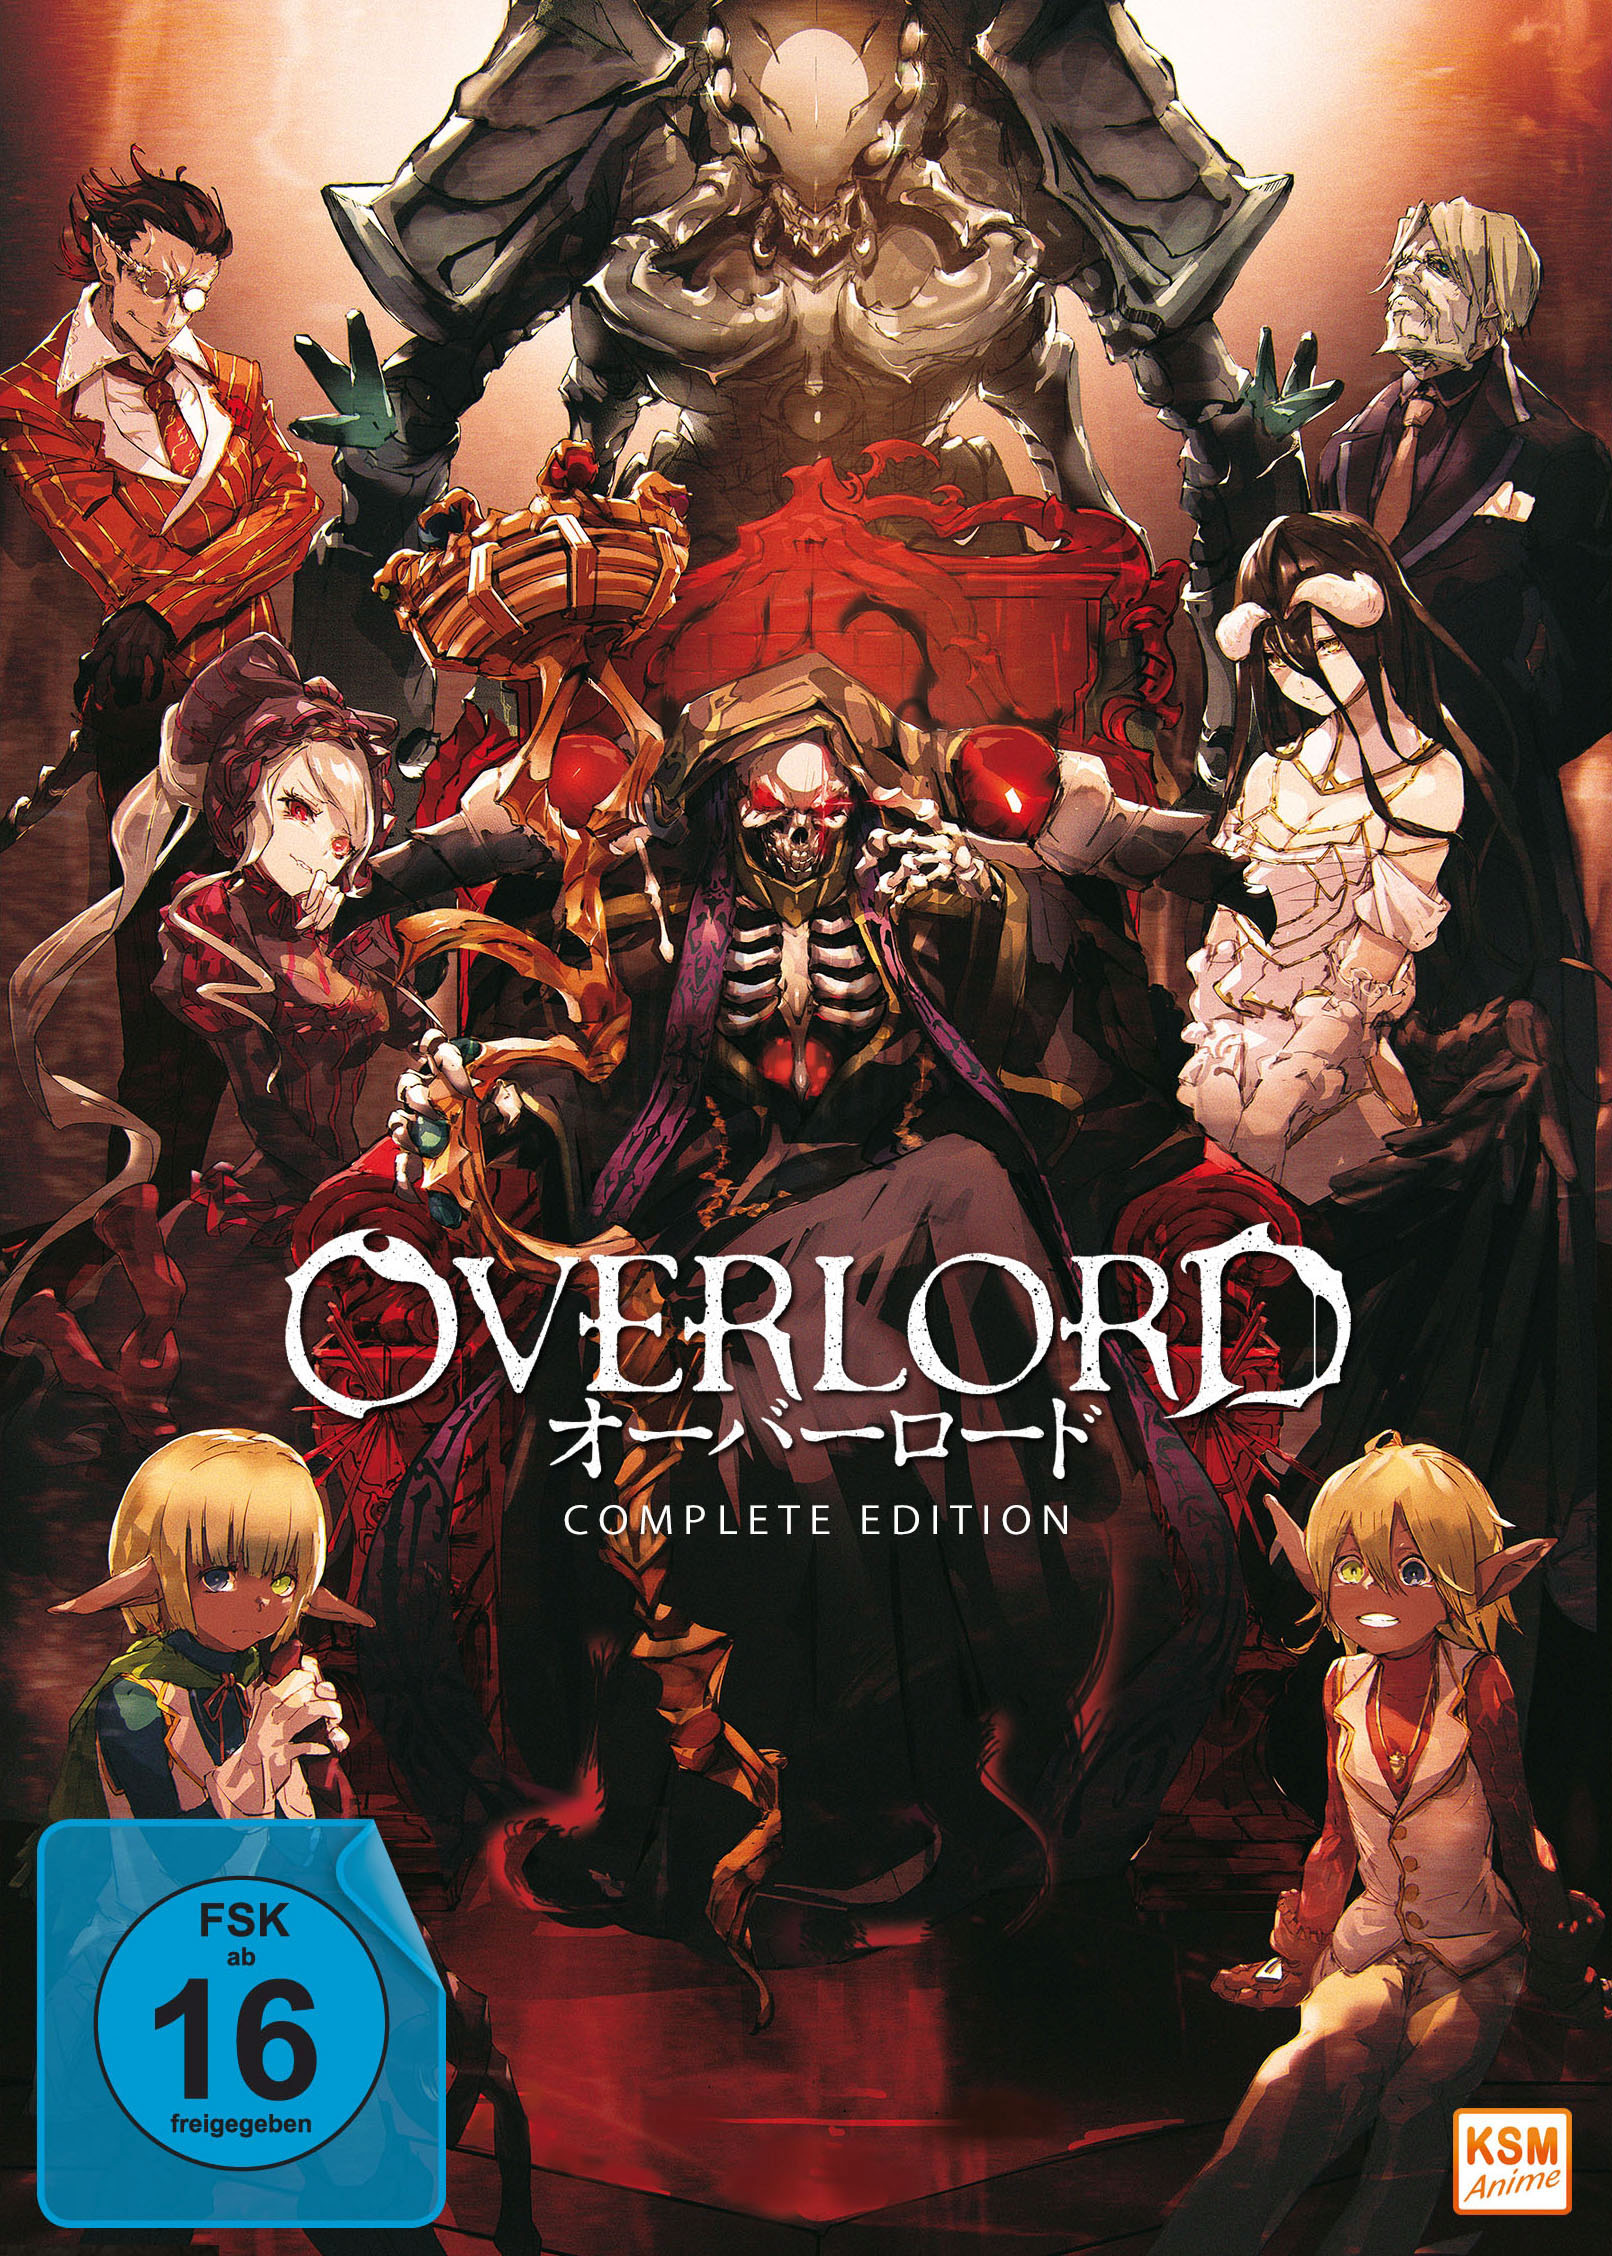 Episoden) - Overlord Complete Edition DVD (13